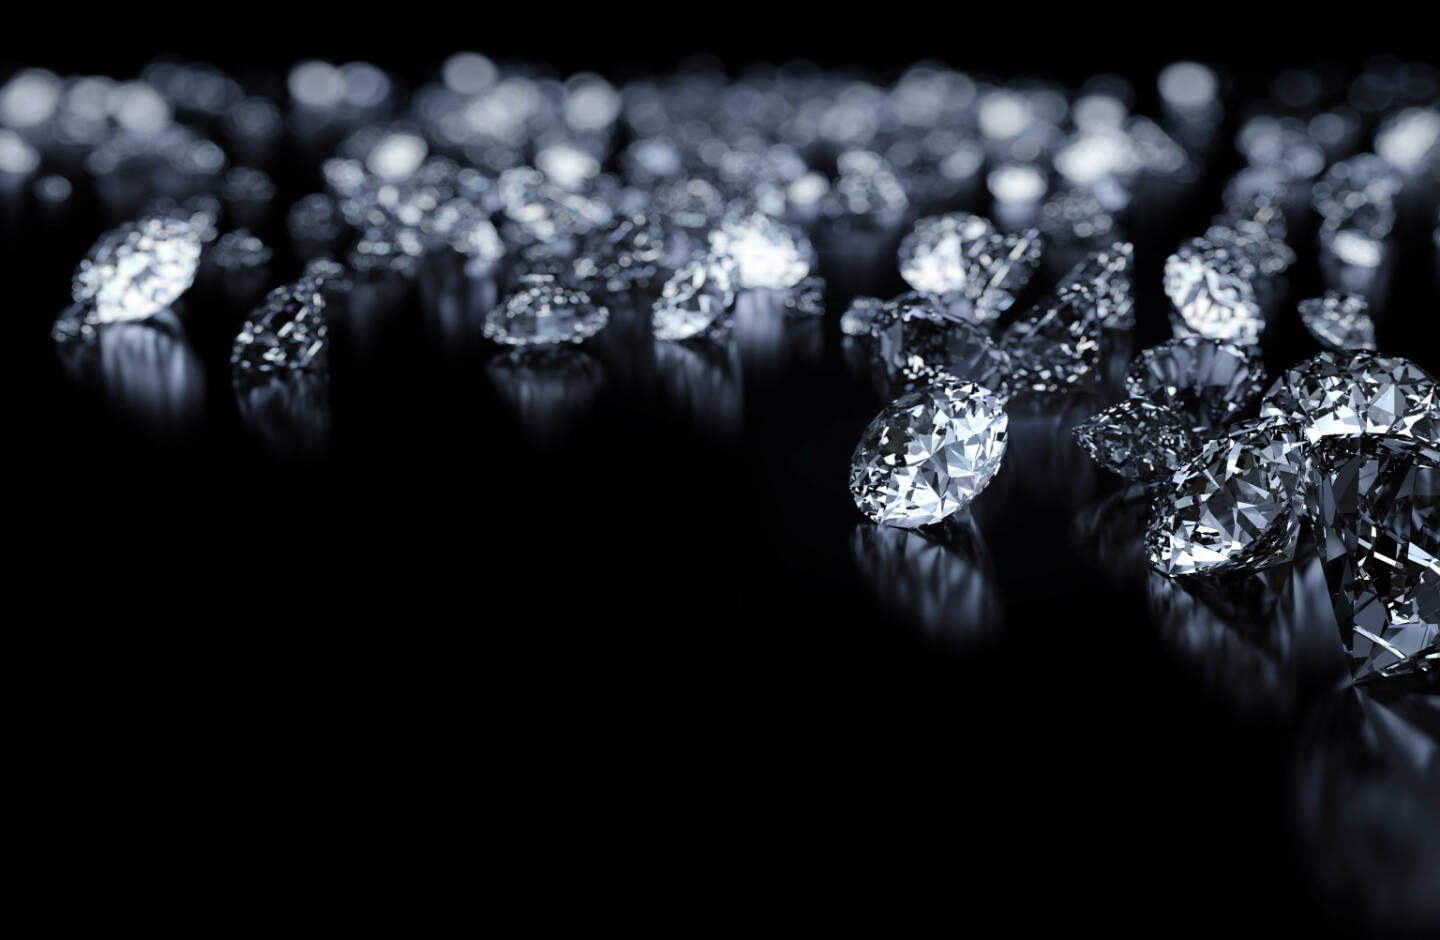 Diamant, Diamanten http://www.shutterstock.com/de/pic-114395257/stock-photo-diamonds-background-with-space-for-text.html